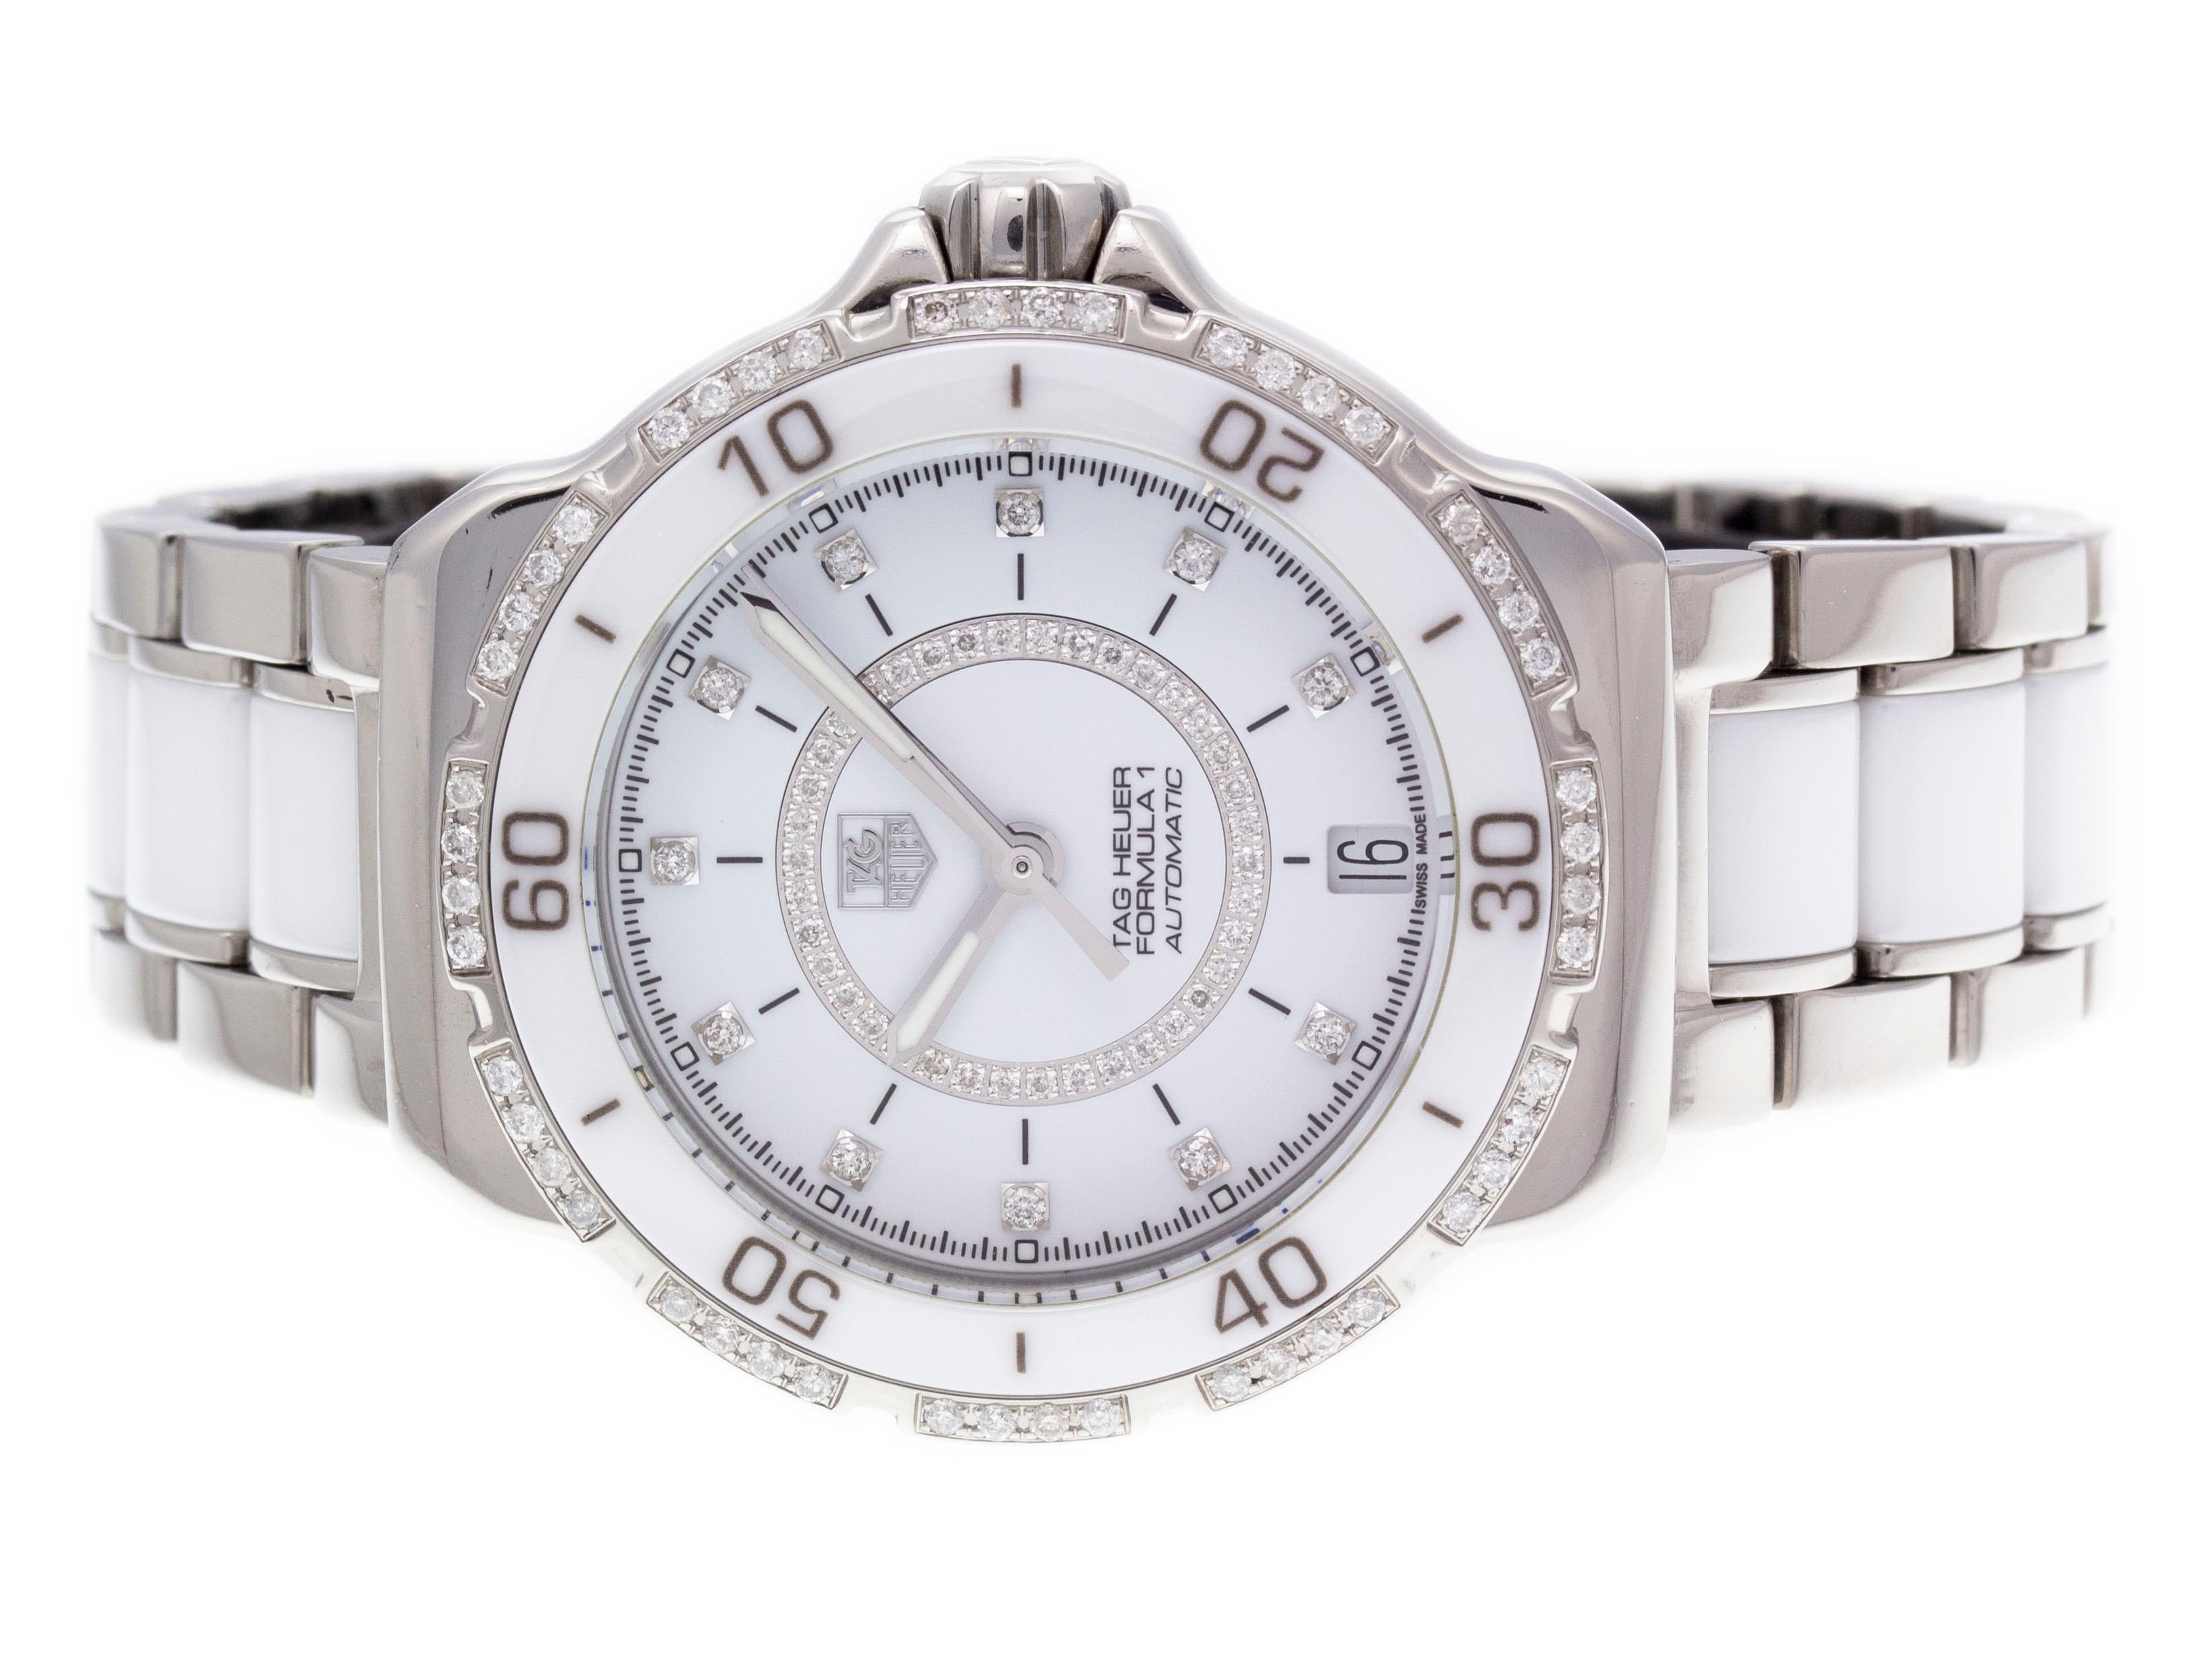 Stainless steel & ceramic Tag Heuer Formula 1 automatic watch with a 37mm case, white diamond dial, and bracelet with folding clasp. Features include hours, minutes, seconds and date. Comes with a Tag Box and 2 Year Store Warranty.​

Brand	Tag